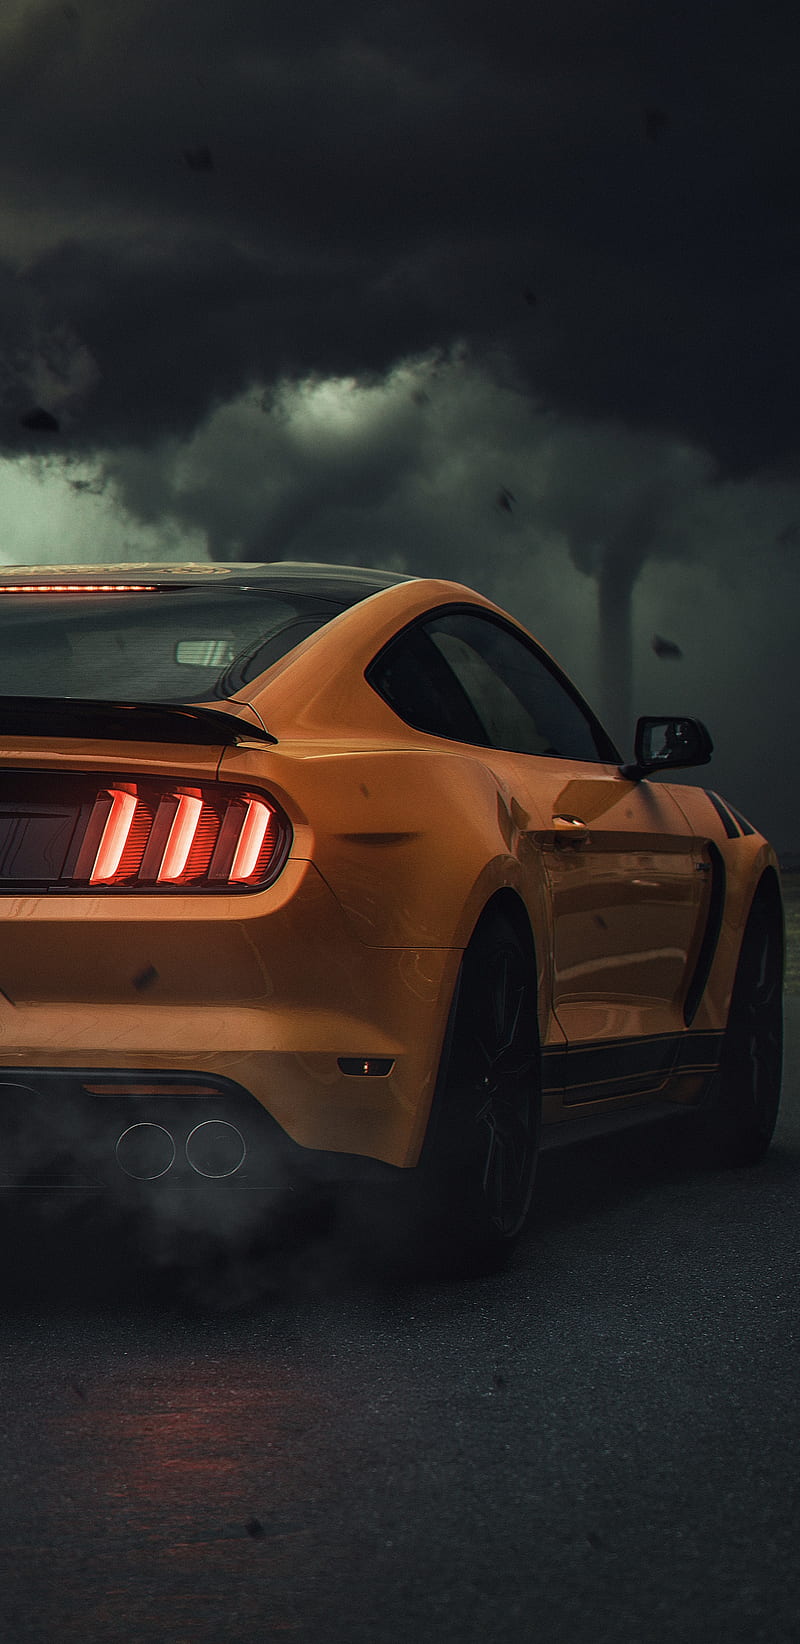 Ford mustang, car, carros, ford